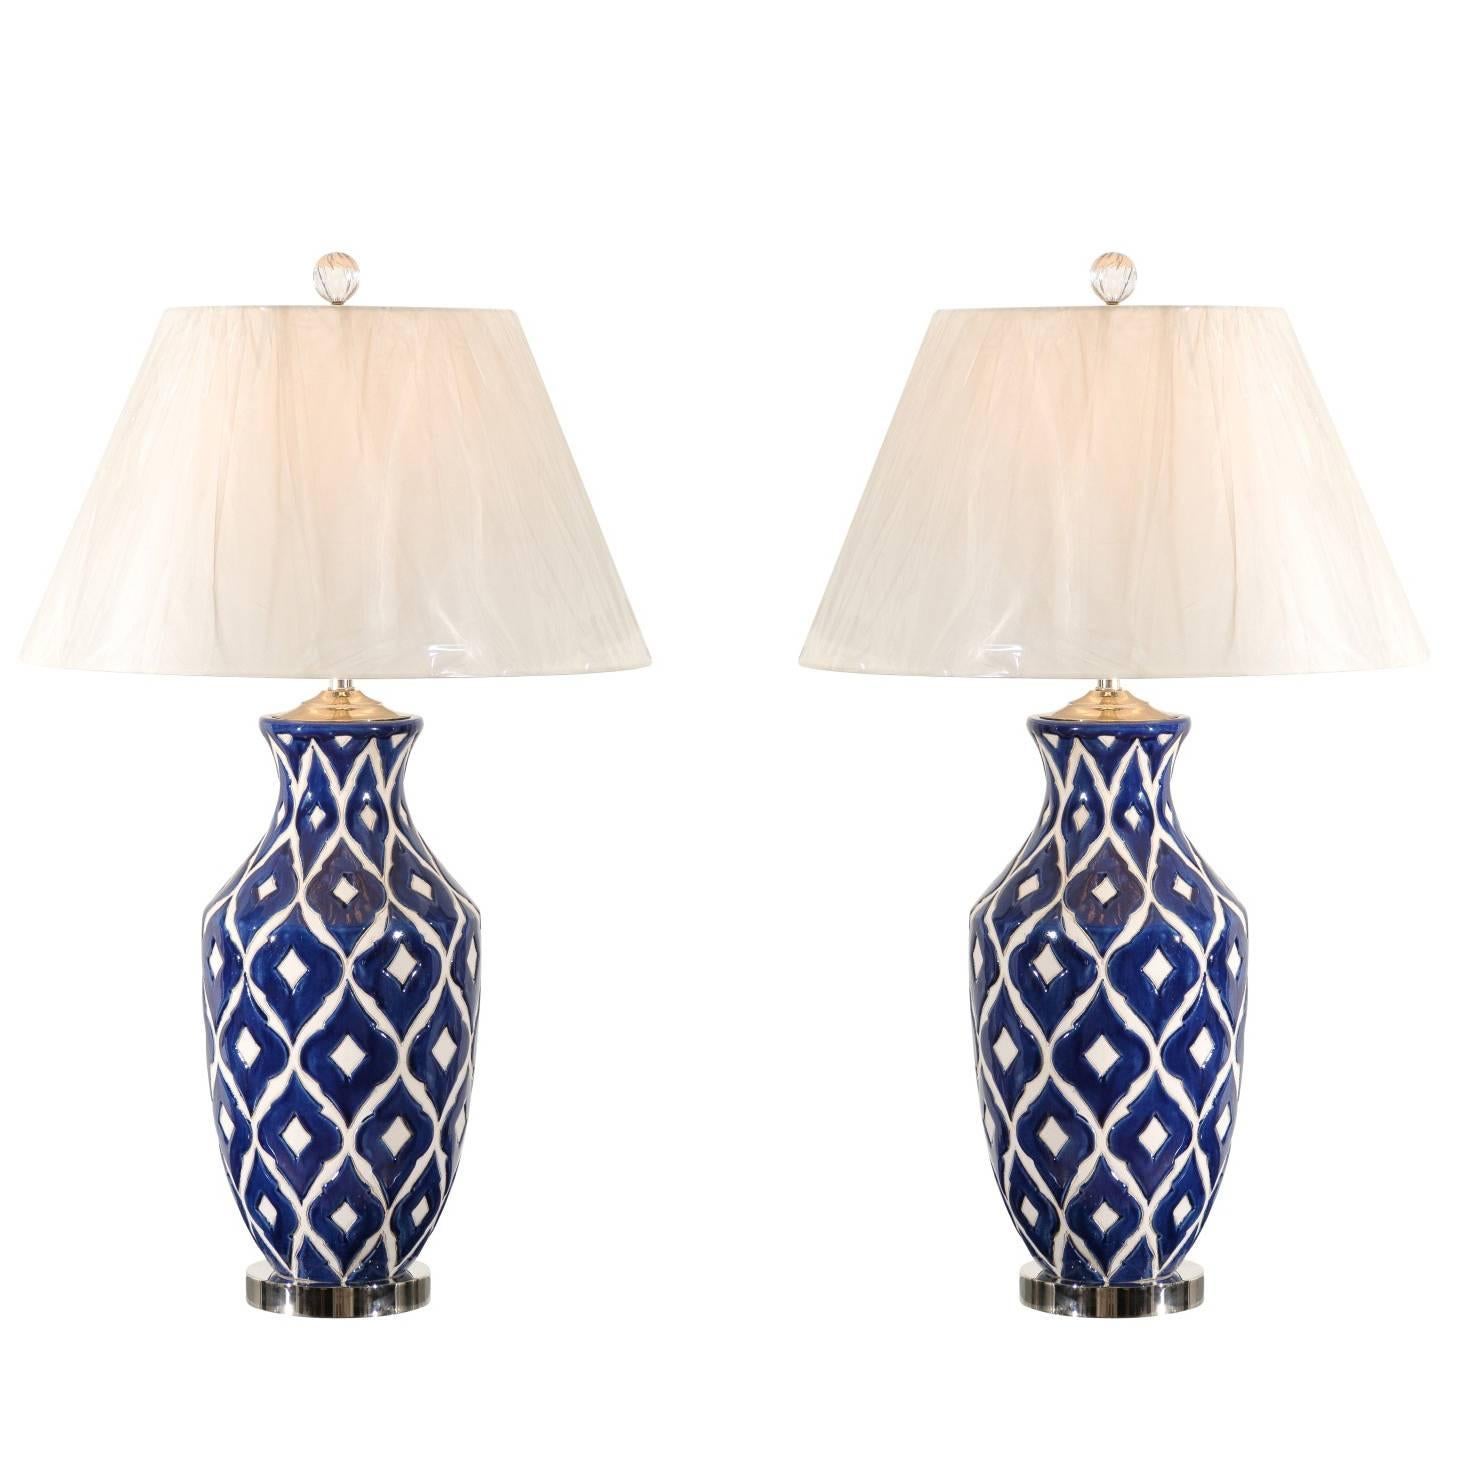 Striking Pair of Large-Scale Ceramic Lamps with Accents of Nickel and Lucite For Sale